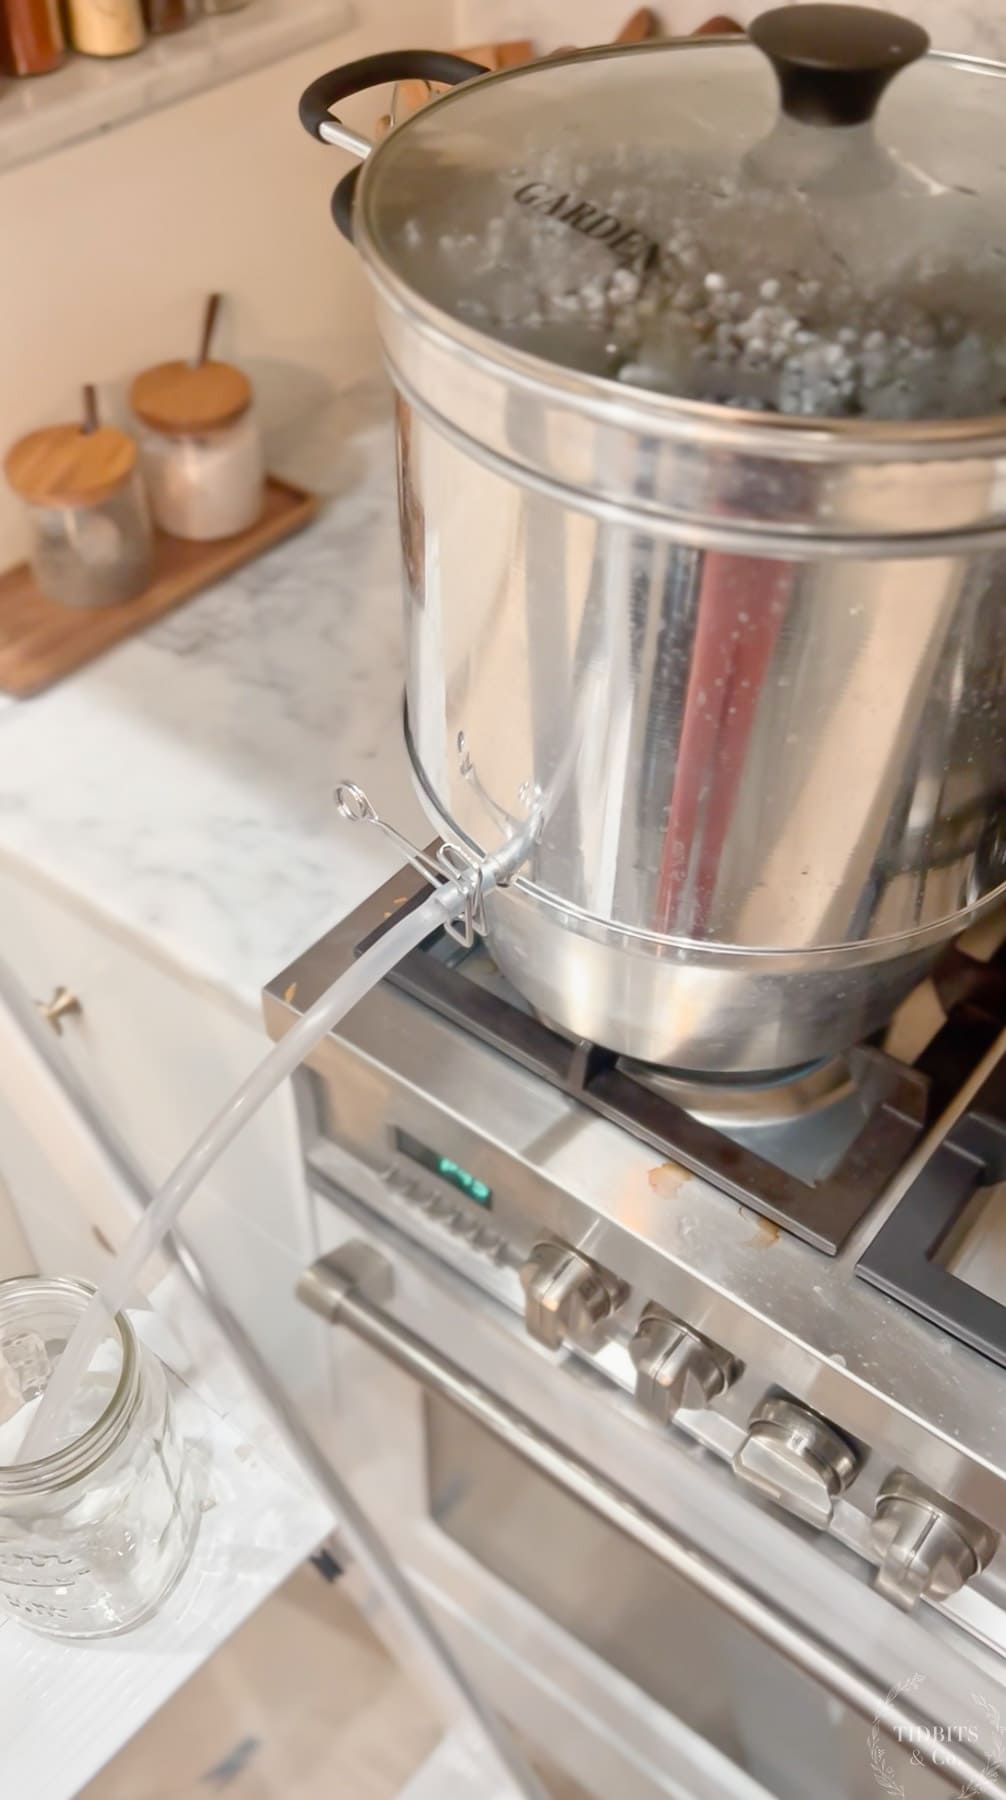 A steam juicer sits on a stainless steel stove top